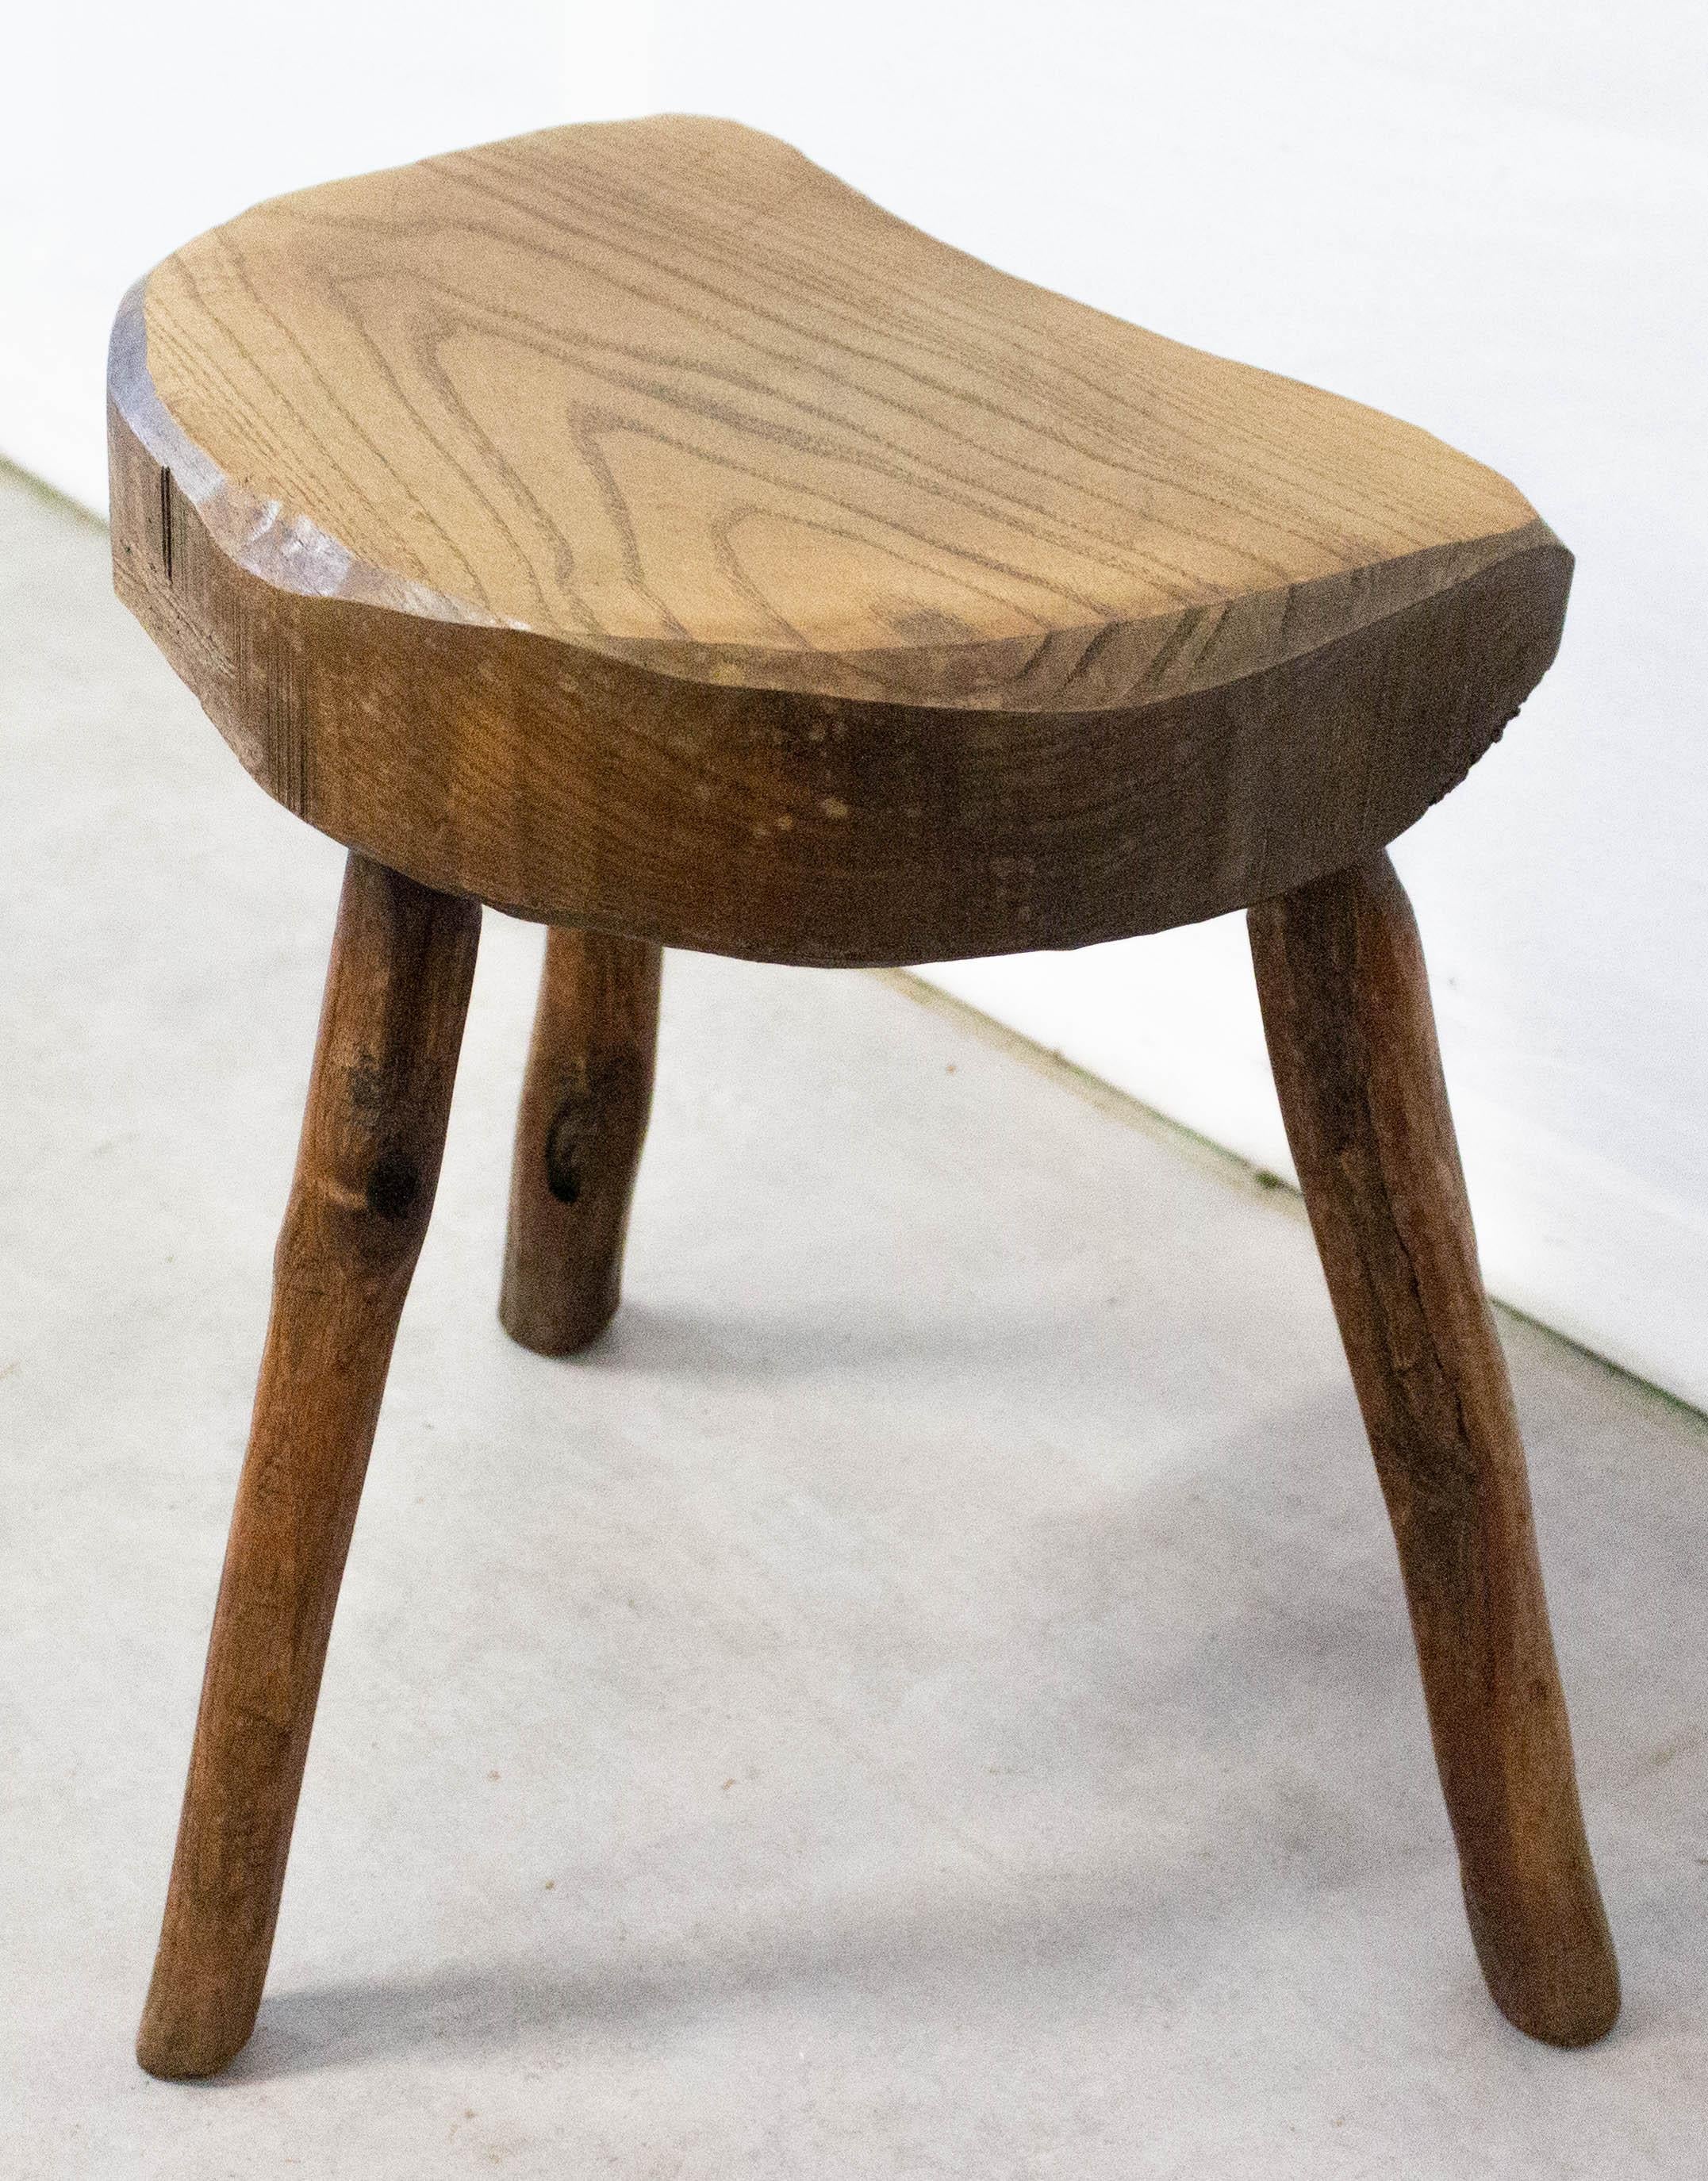 French Provincial Three-Leg Elm Brutalist Stool or Milking Stool Midcentury French